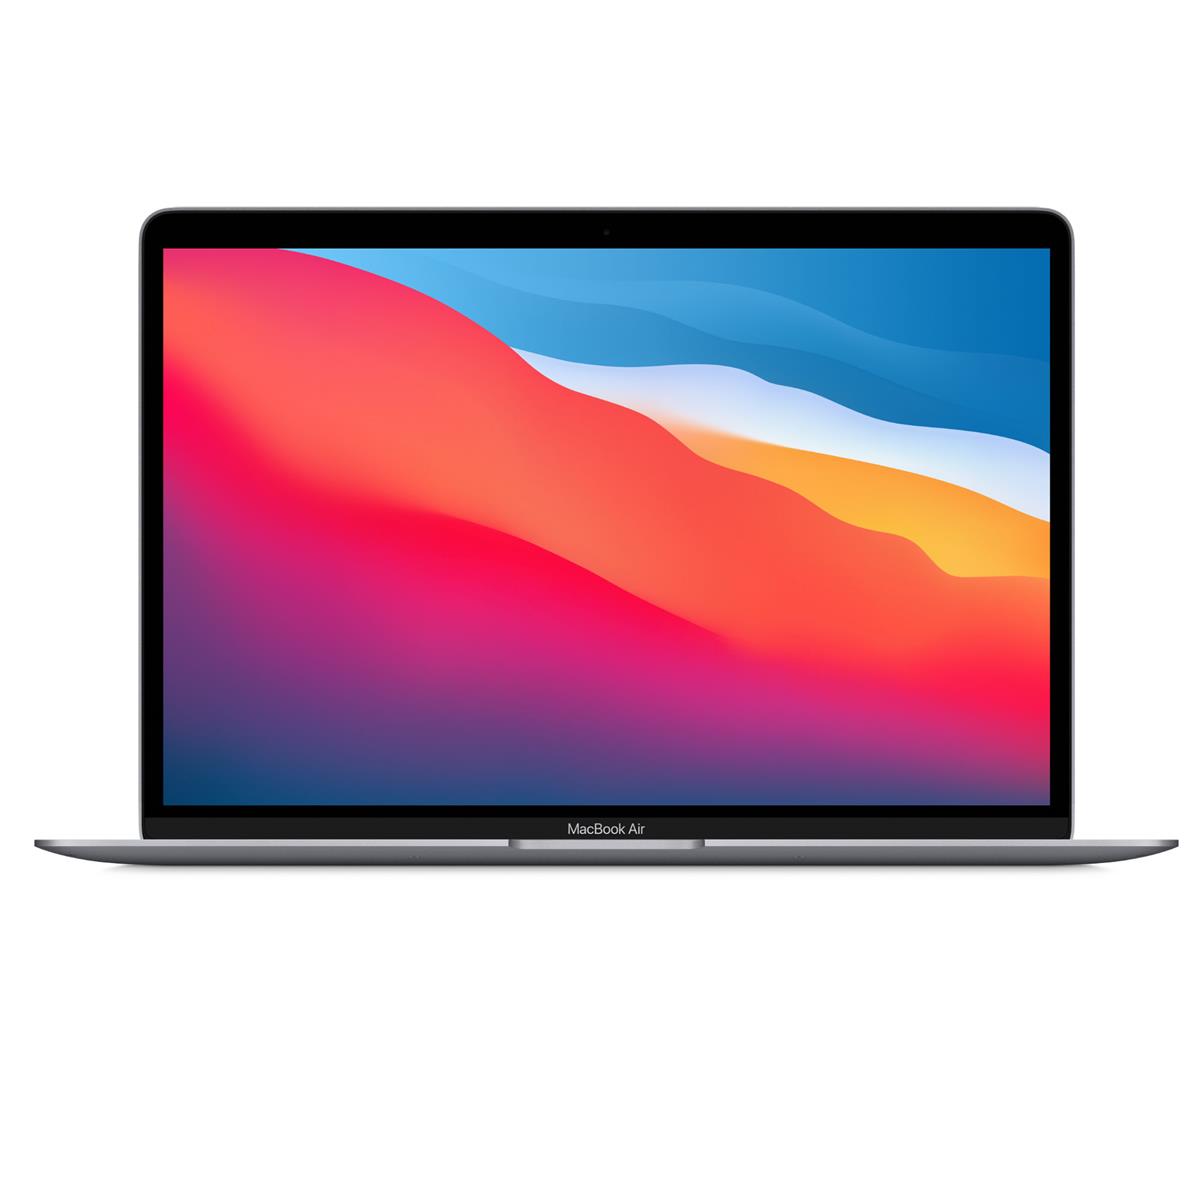 Apple MacBook Air 13.3" with Retina Display, M1 Chip with 8-Core CPU and 7-Core GPU, 8GB Memory, 256GB SSD, Space Gray, Late 2020